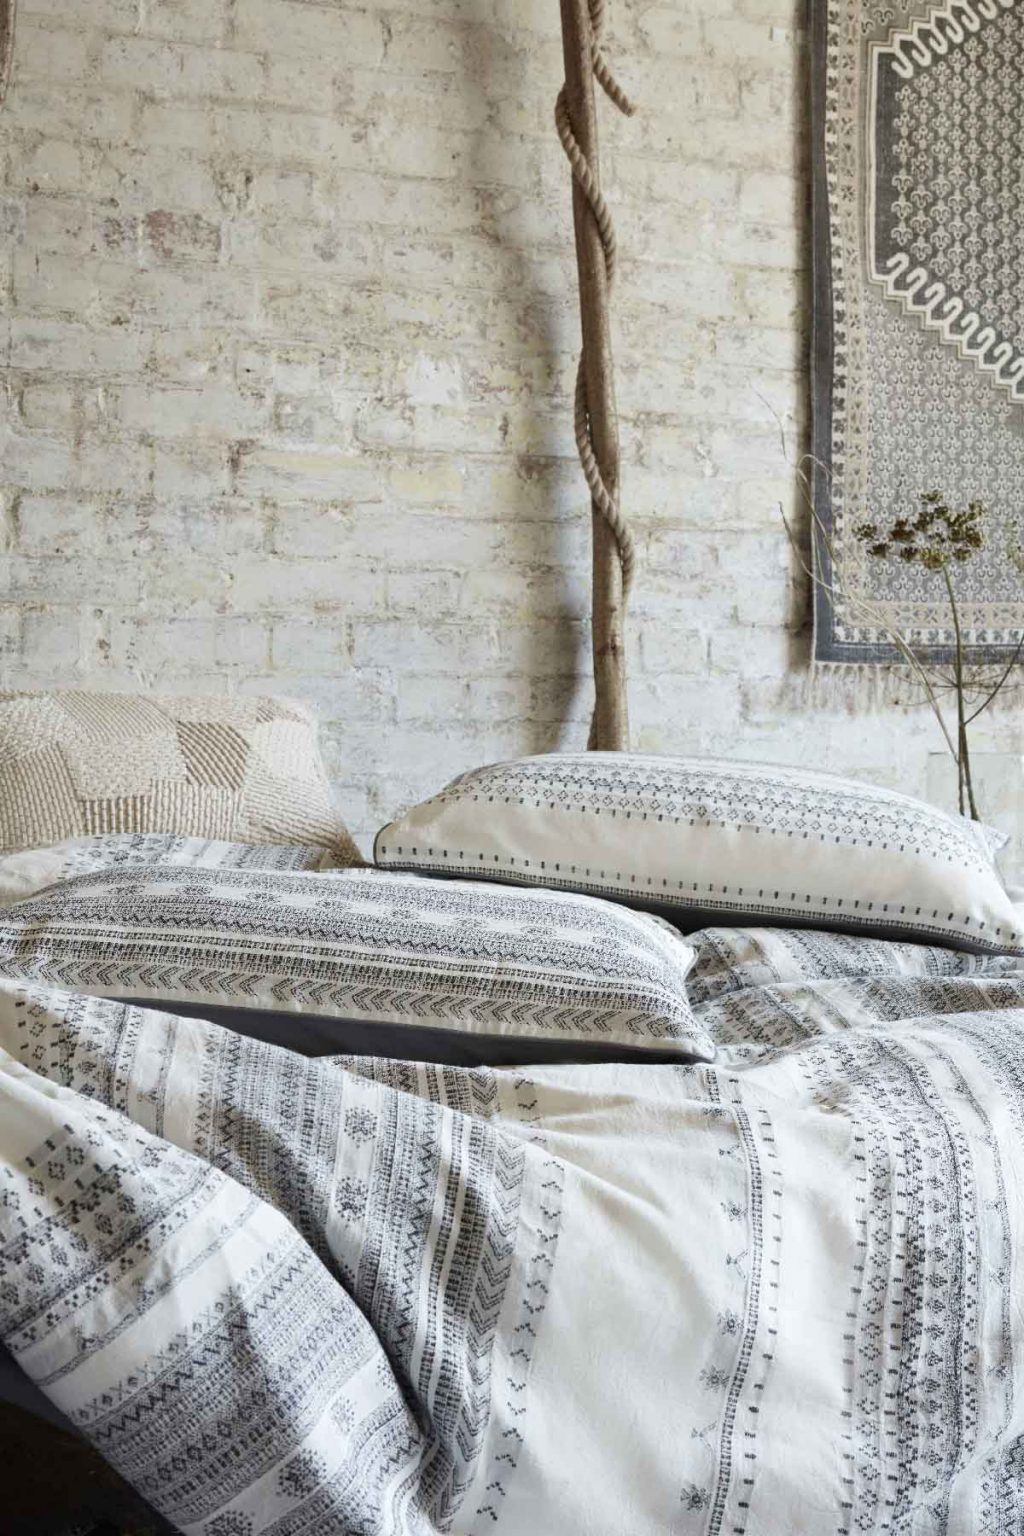 How to choose the right duvet